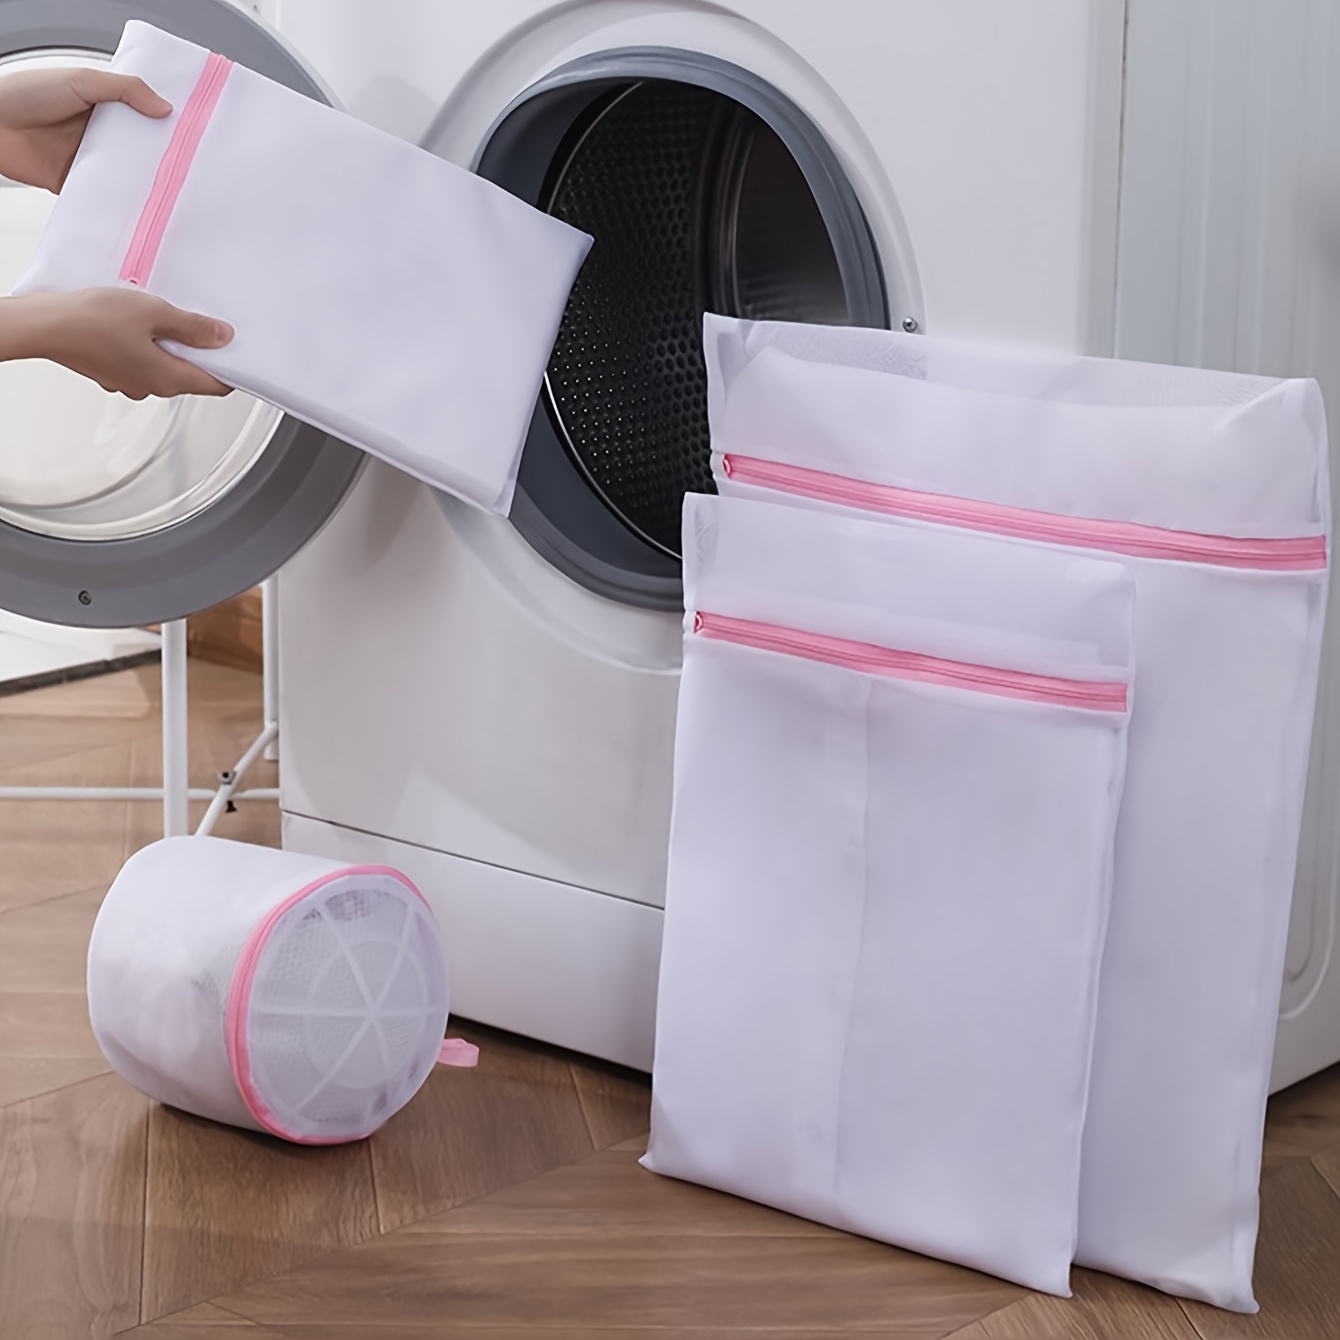 Women Lingerie Bags For Laundry Bags Mesh Wash Bags Bra Bag For Washing  Machine Delicates Bag For Washing Machine Bra Wash Bag Bra Washer Protector Mesh  Laundry Bag Laundry Mesh Bag Washing